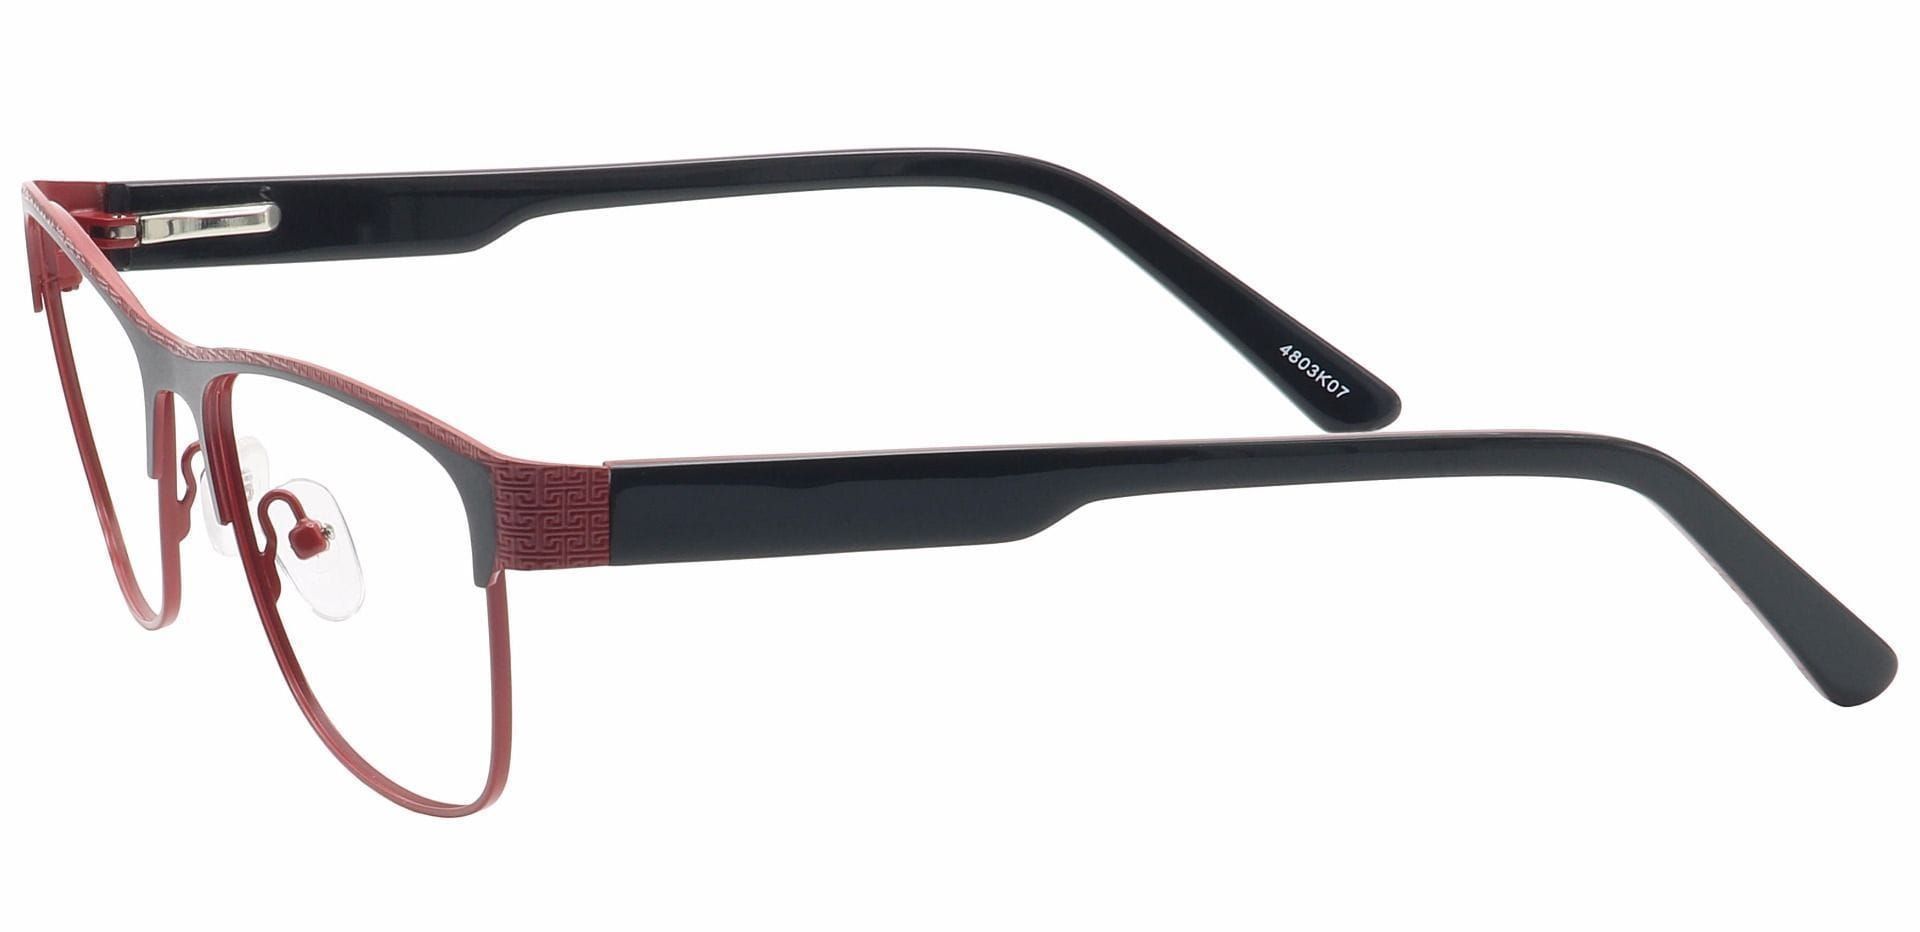 Ama Oval Reading Glasses - Red